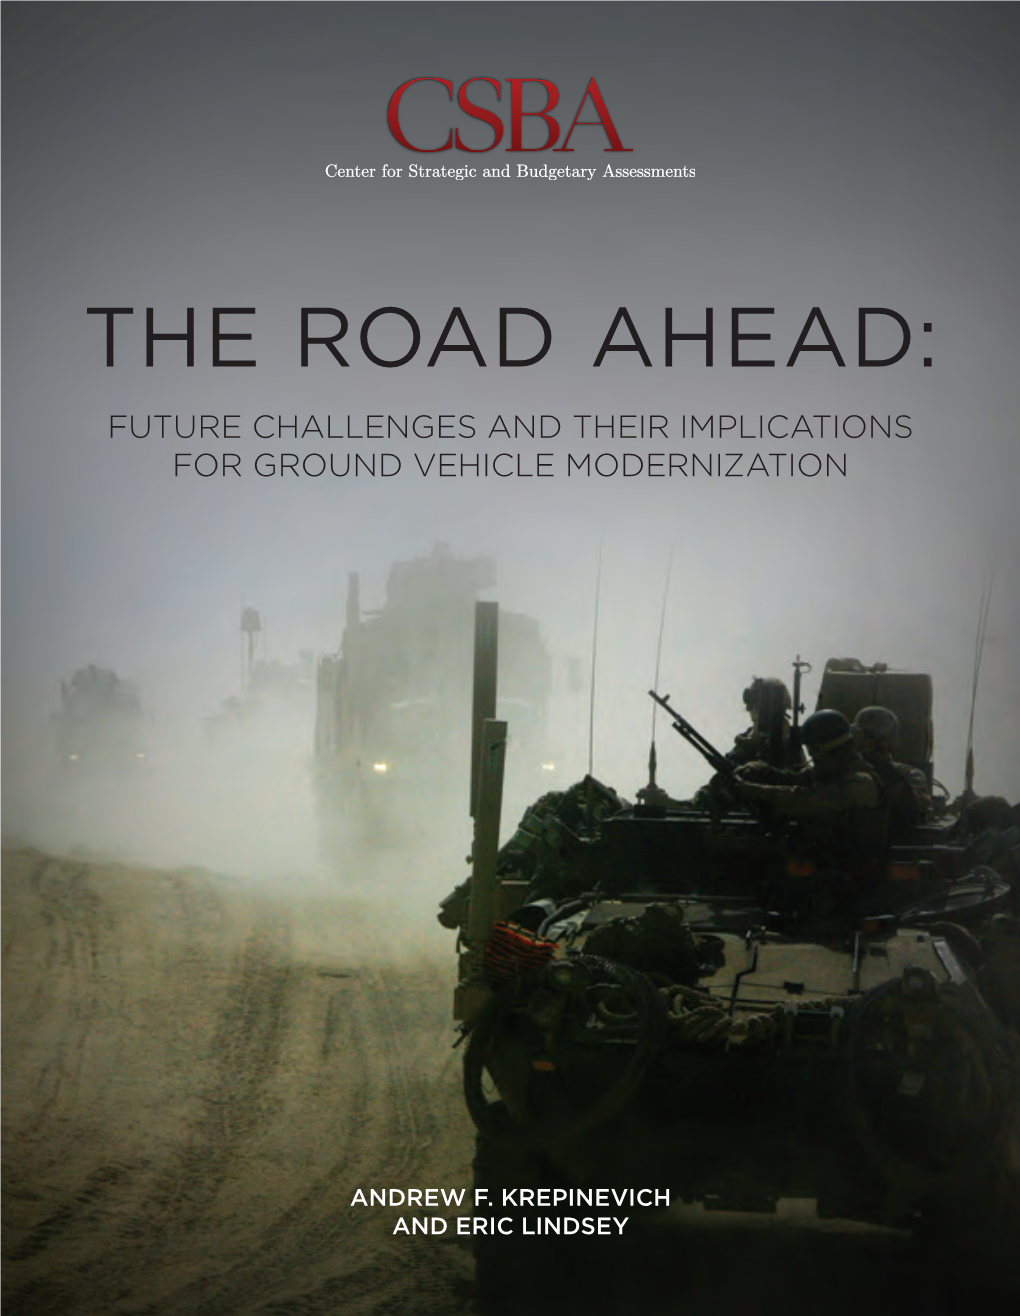 The Road Ahead: Future Challenges and Their Implications for Ground Vehicle Modernization